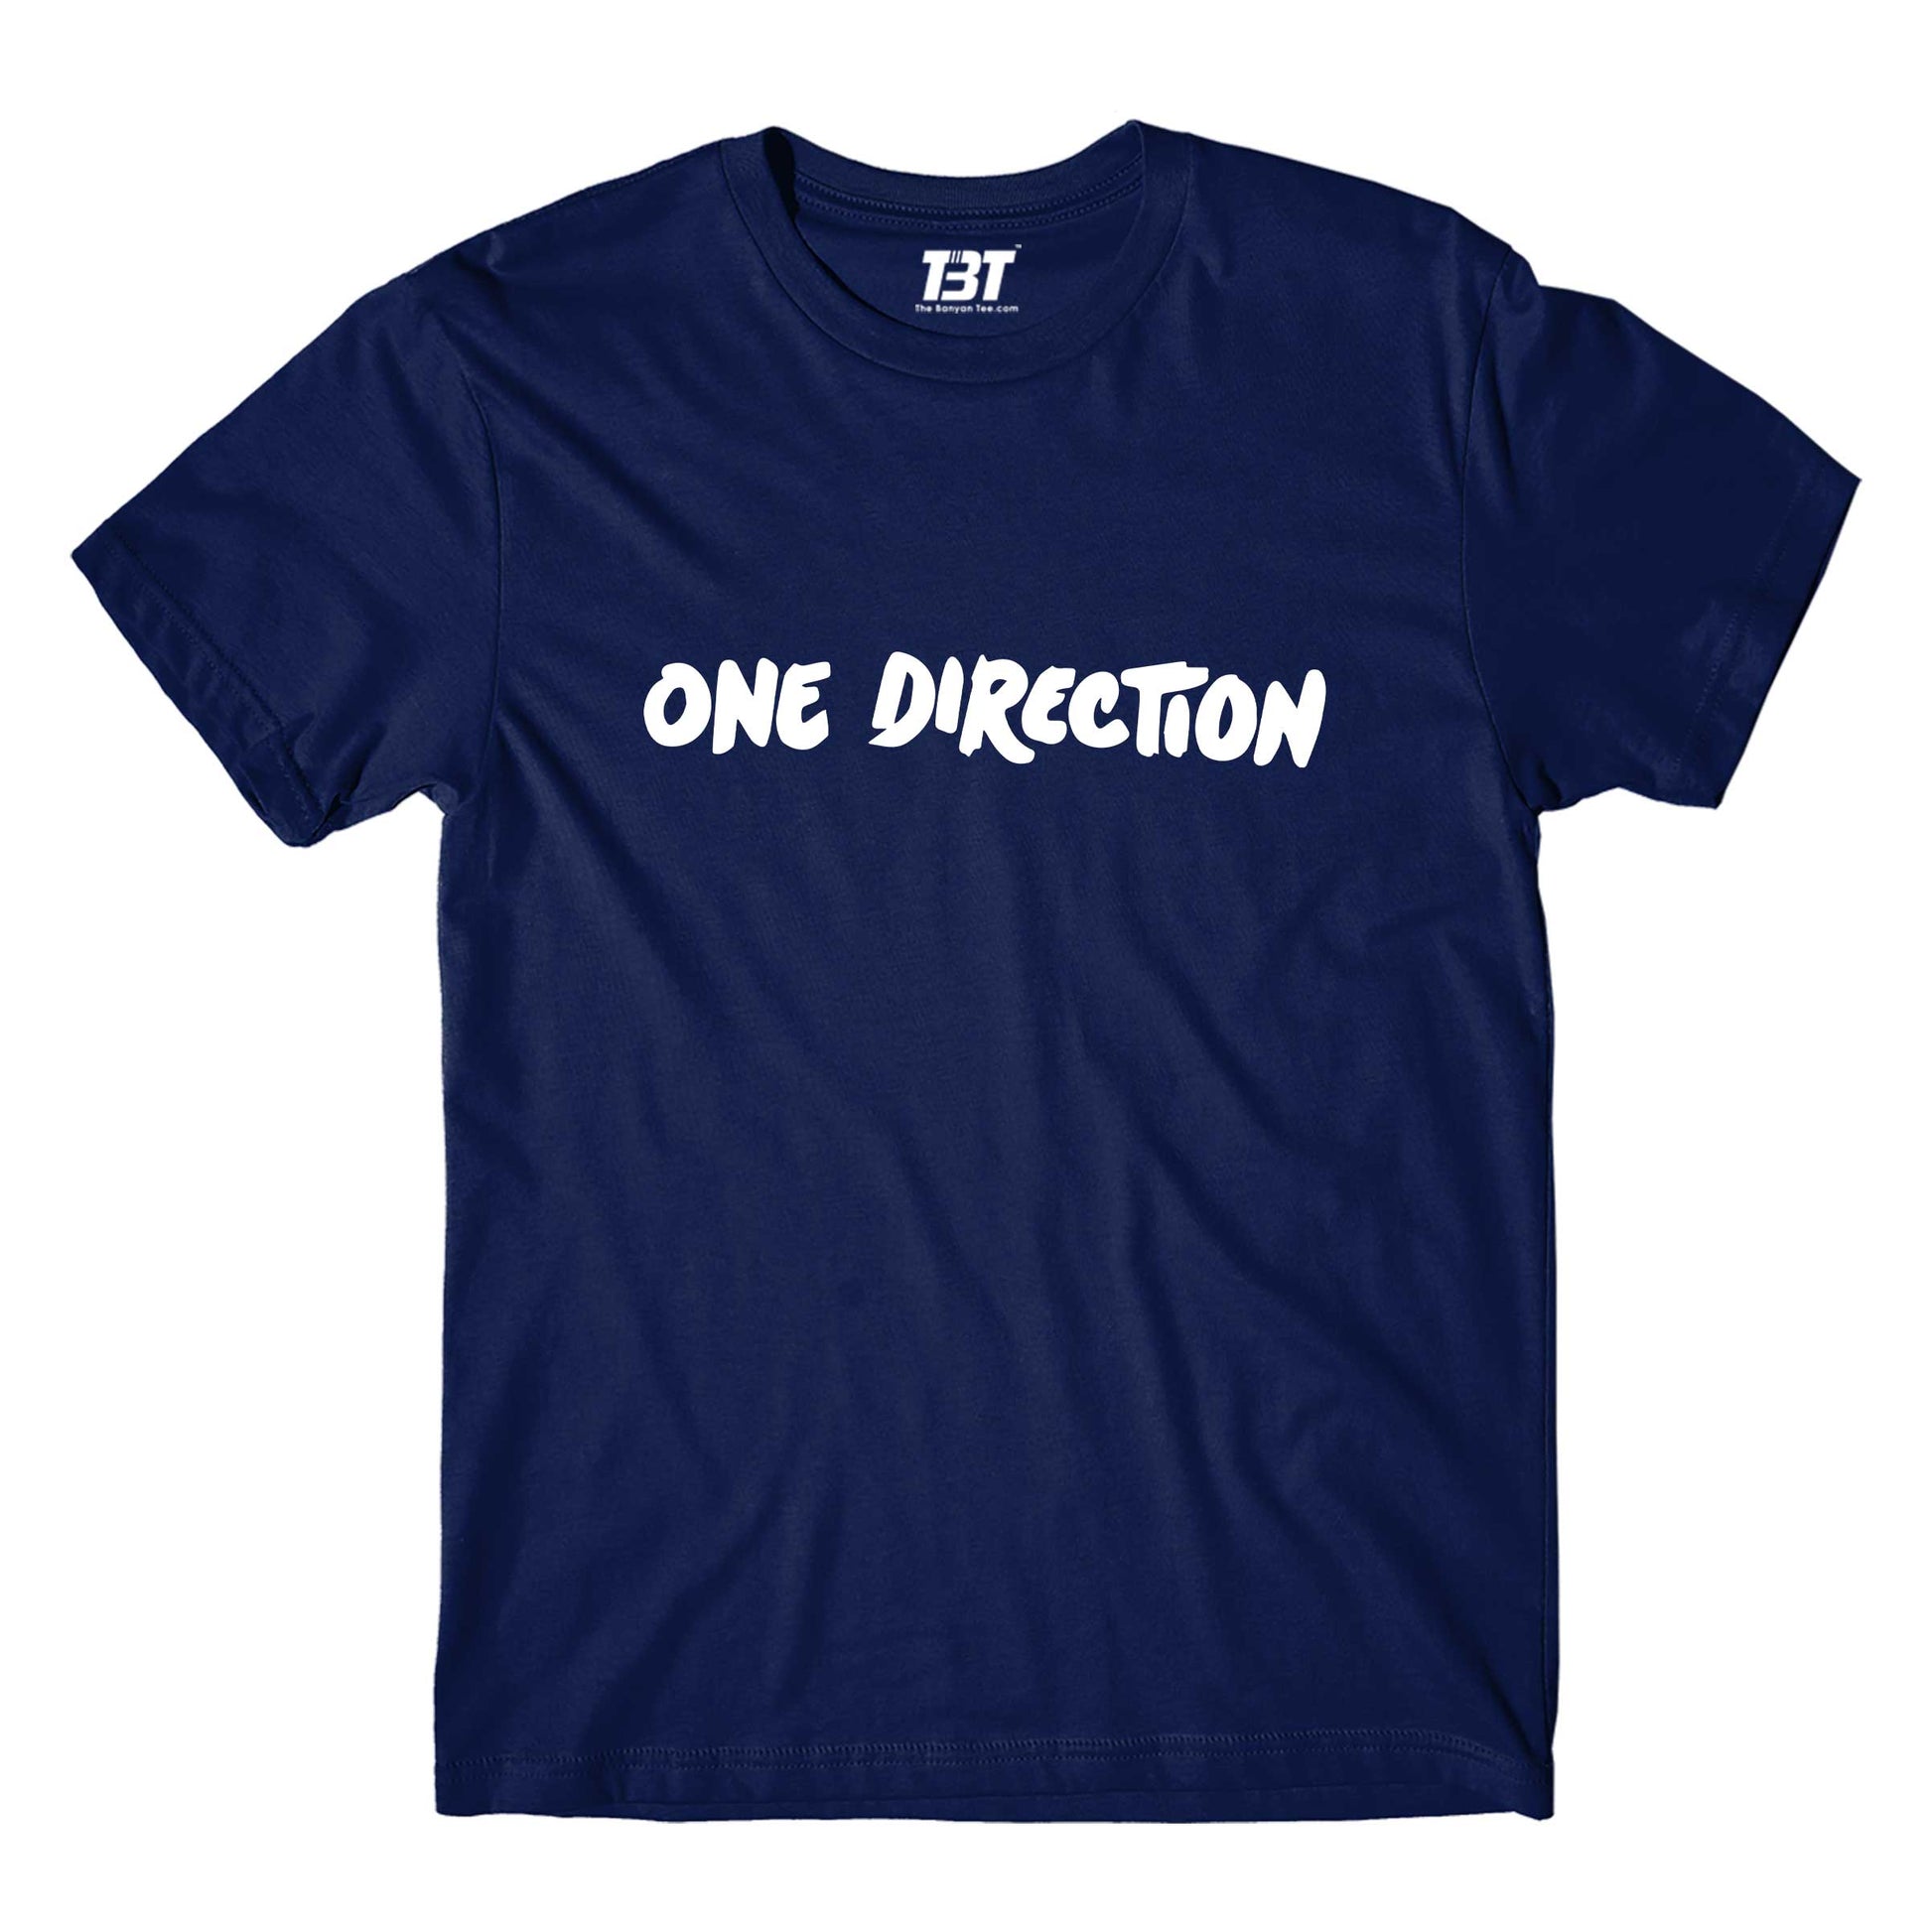 the banyan tee merch on sale One Direction T shirt - On Sale - XS (Chest size 36 IN)